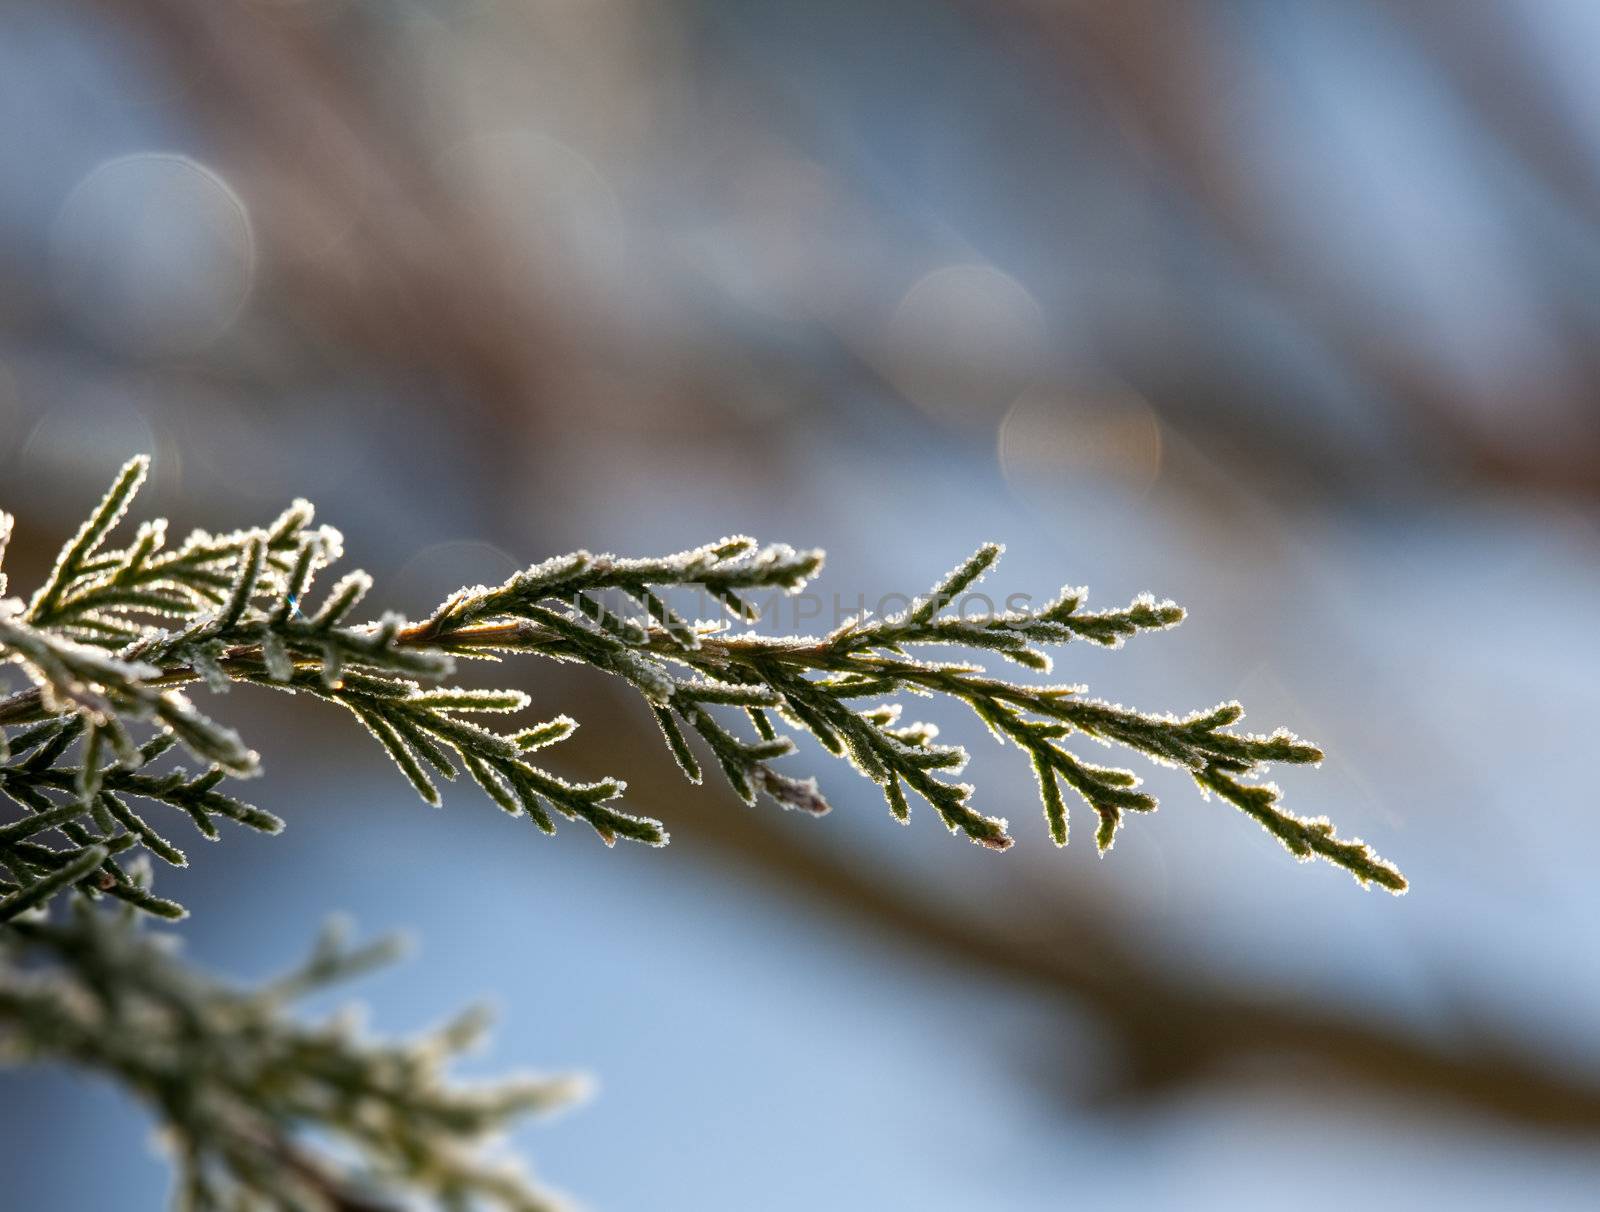 Early morning sun highlights the frost on the needles of conifer tree